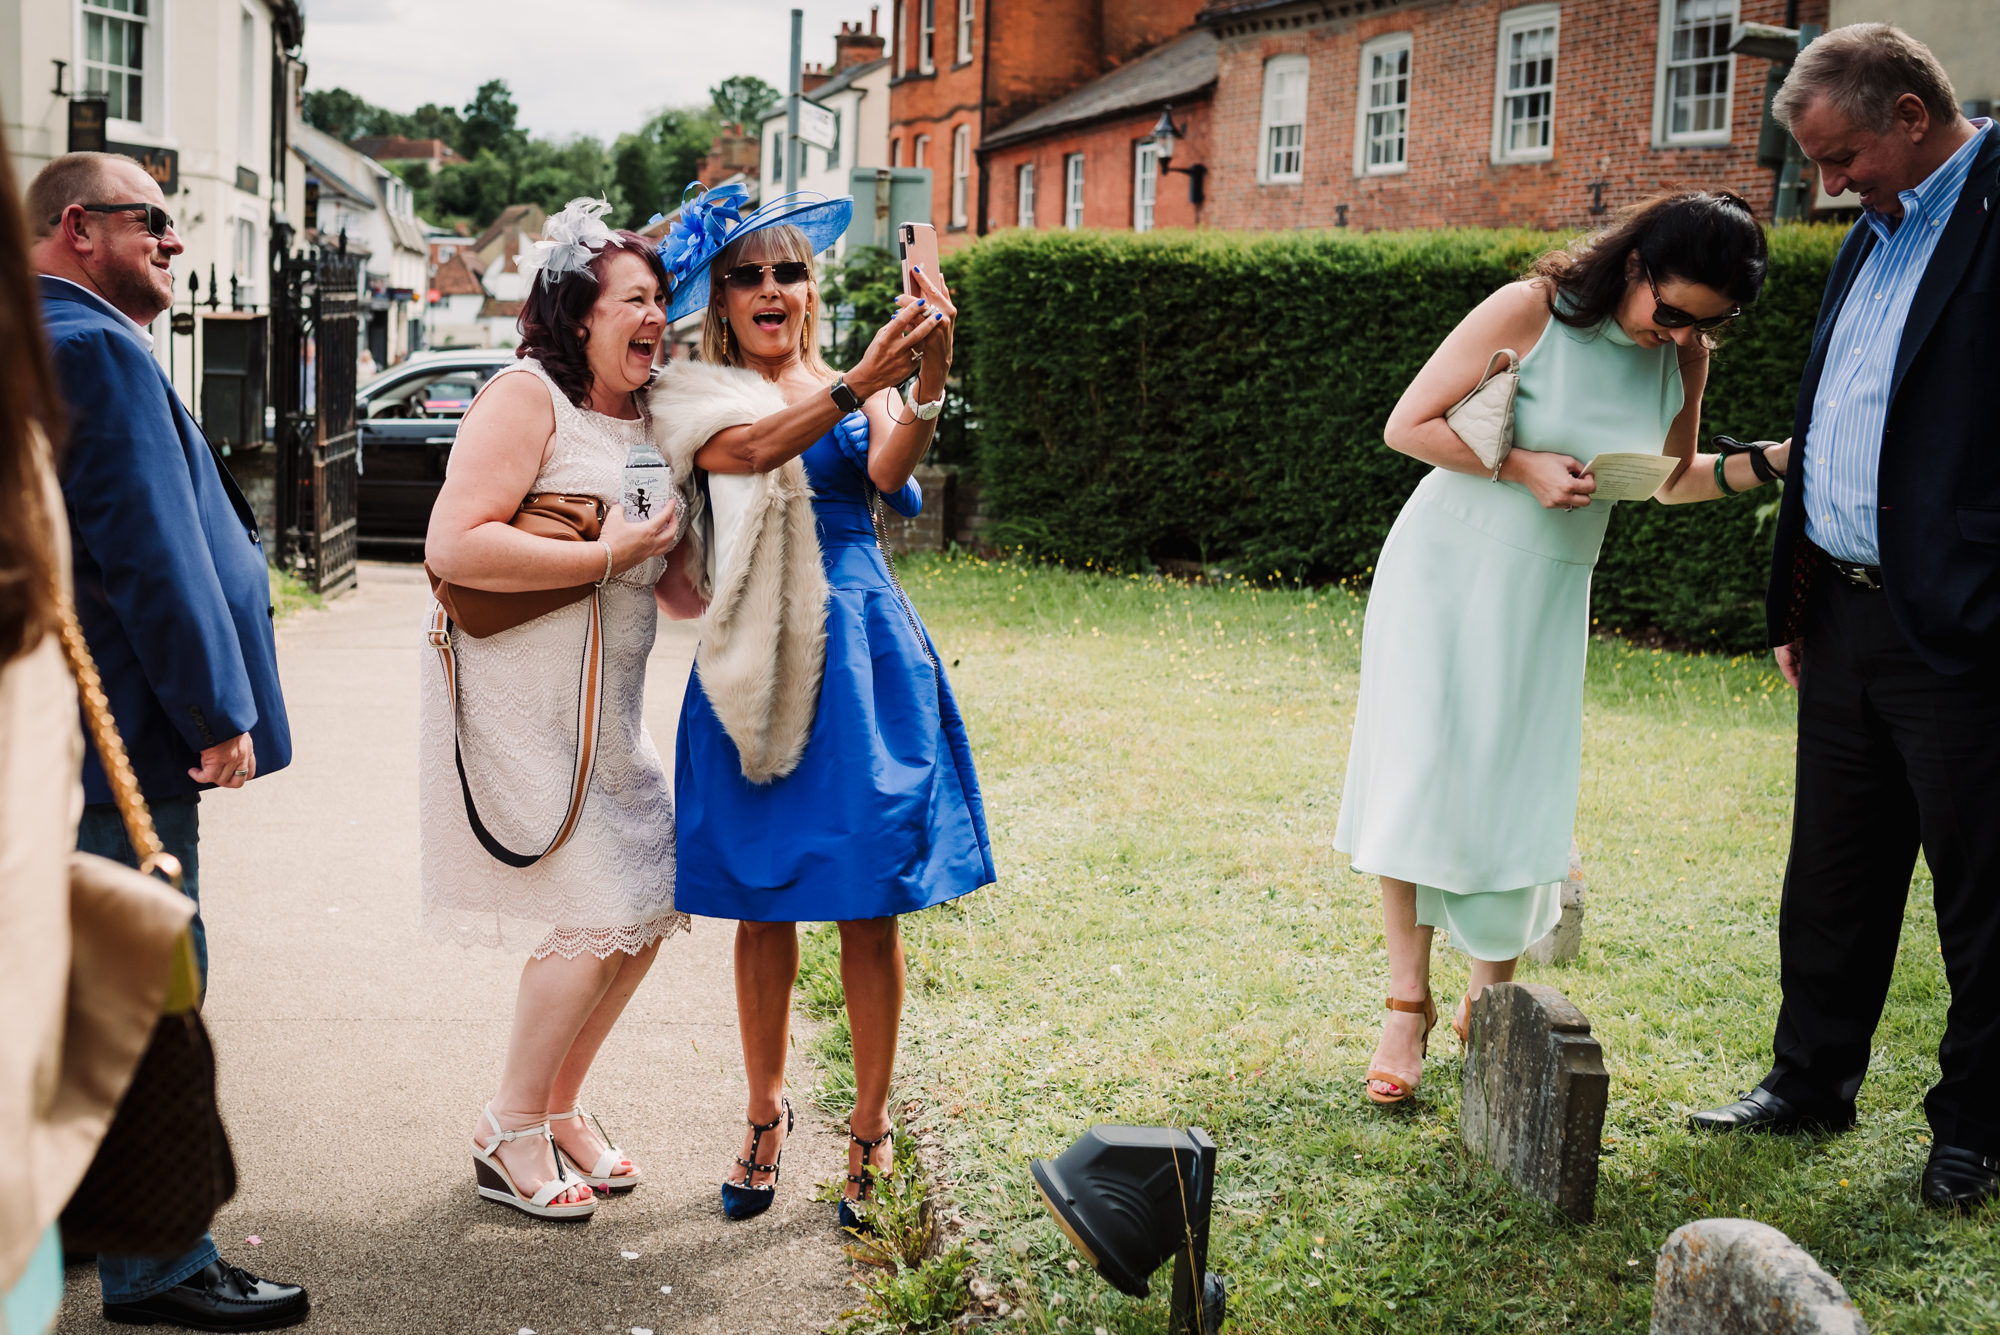 Wedding photographer captures guests taking selfies outside the pub in Hertfordshire